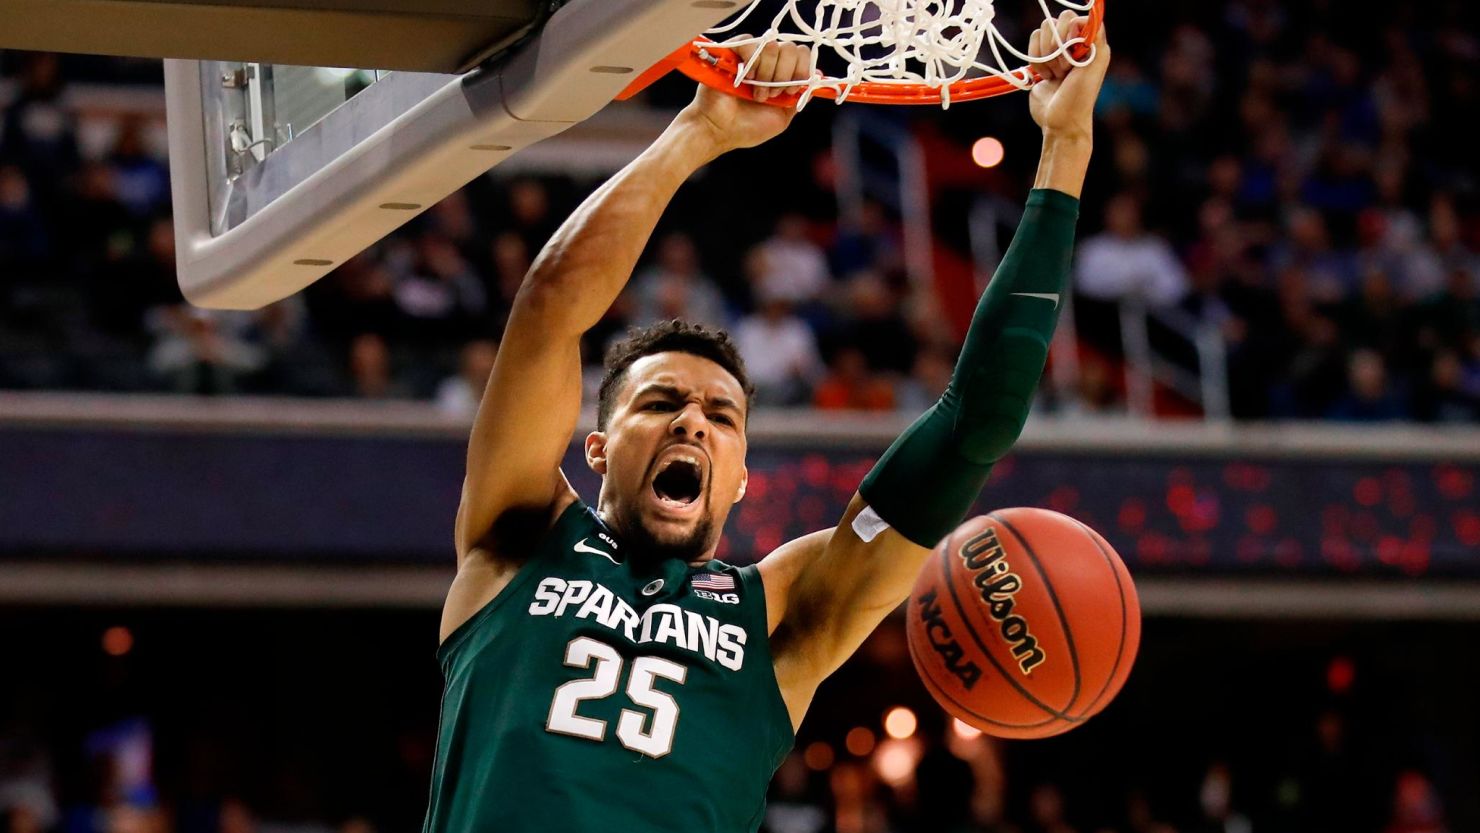 Michigan State forward Kenny Goins scores against Duke on Sunday. Michigan State won and advanced to the Final Four.